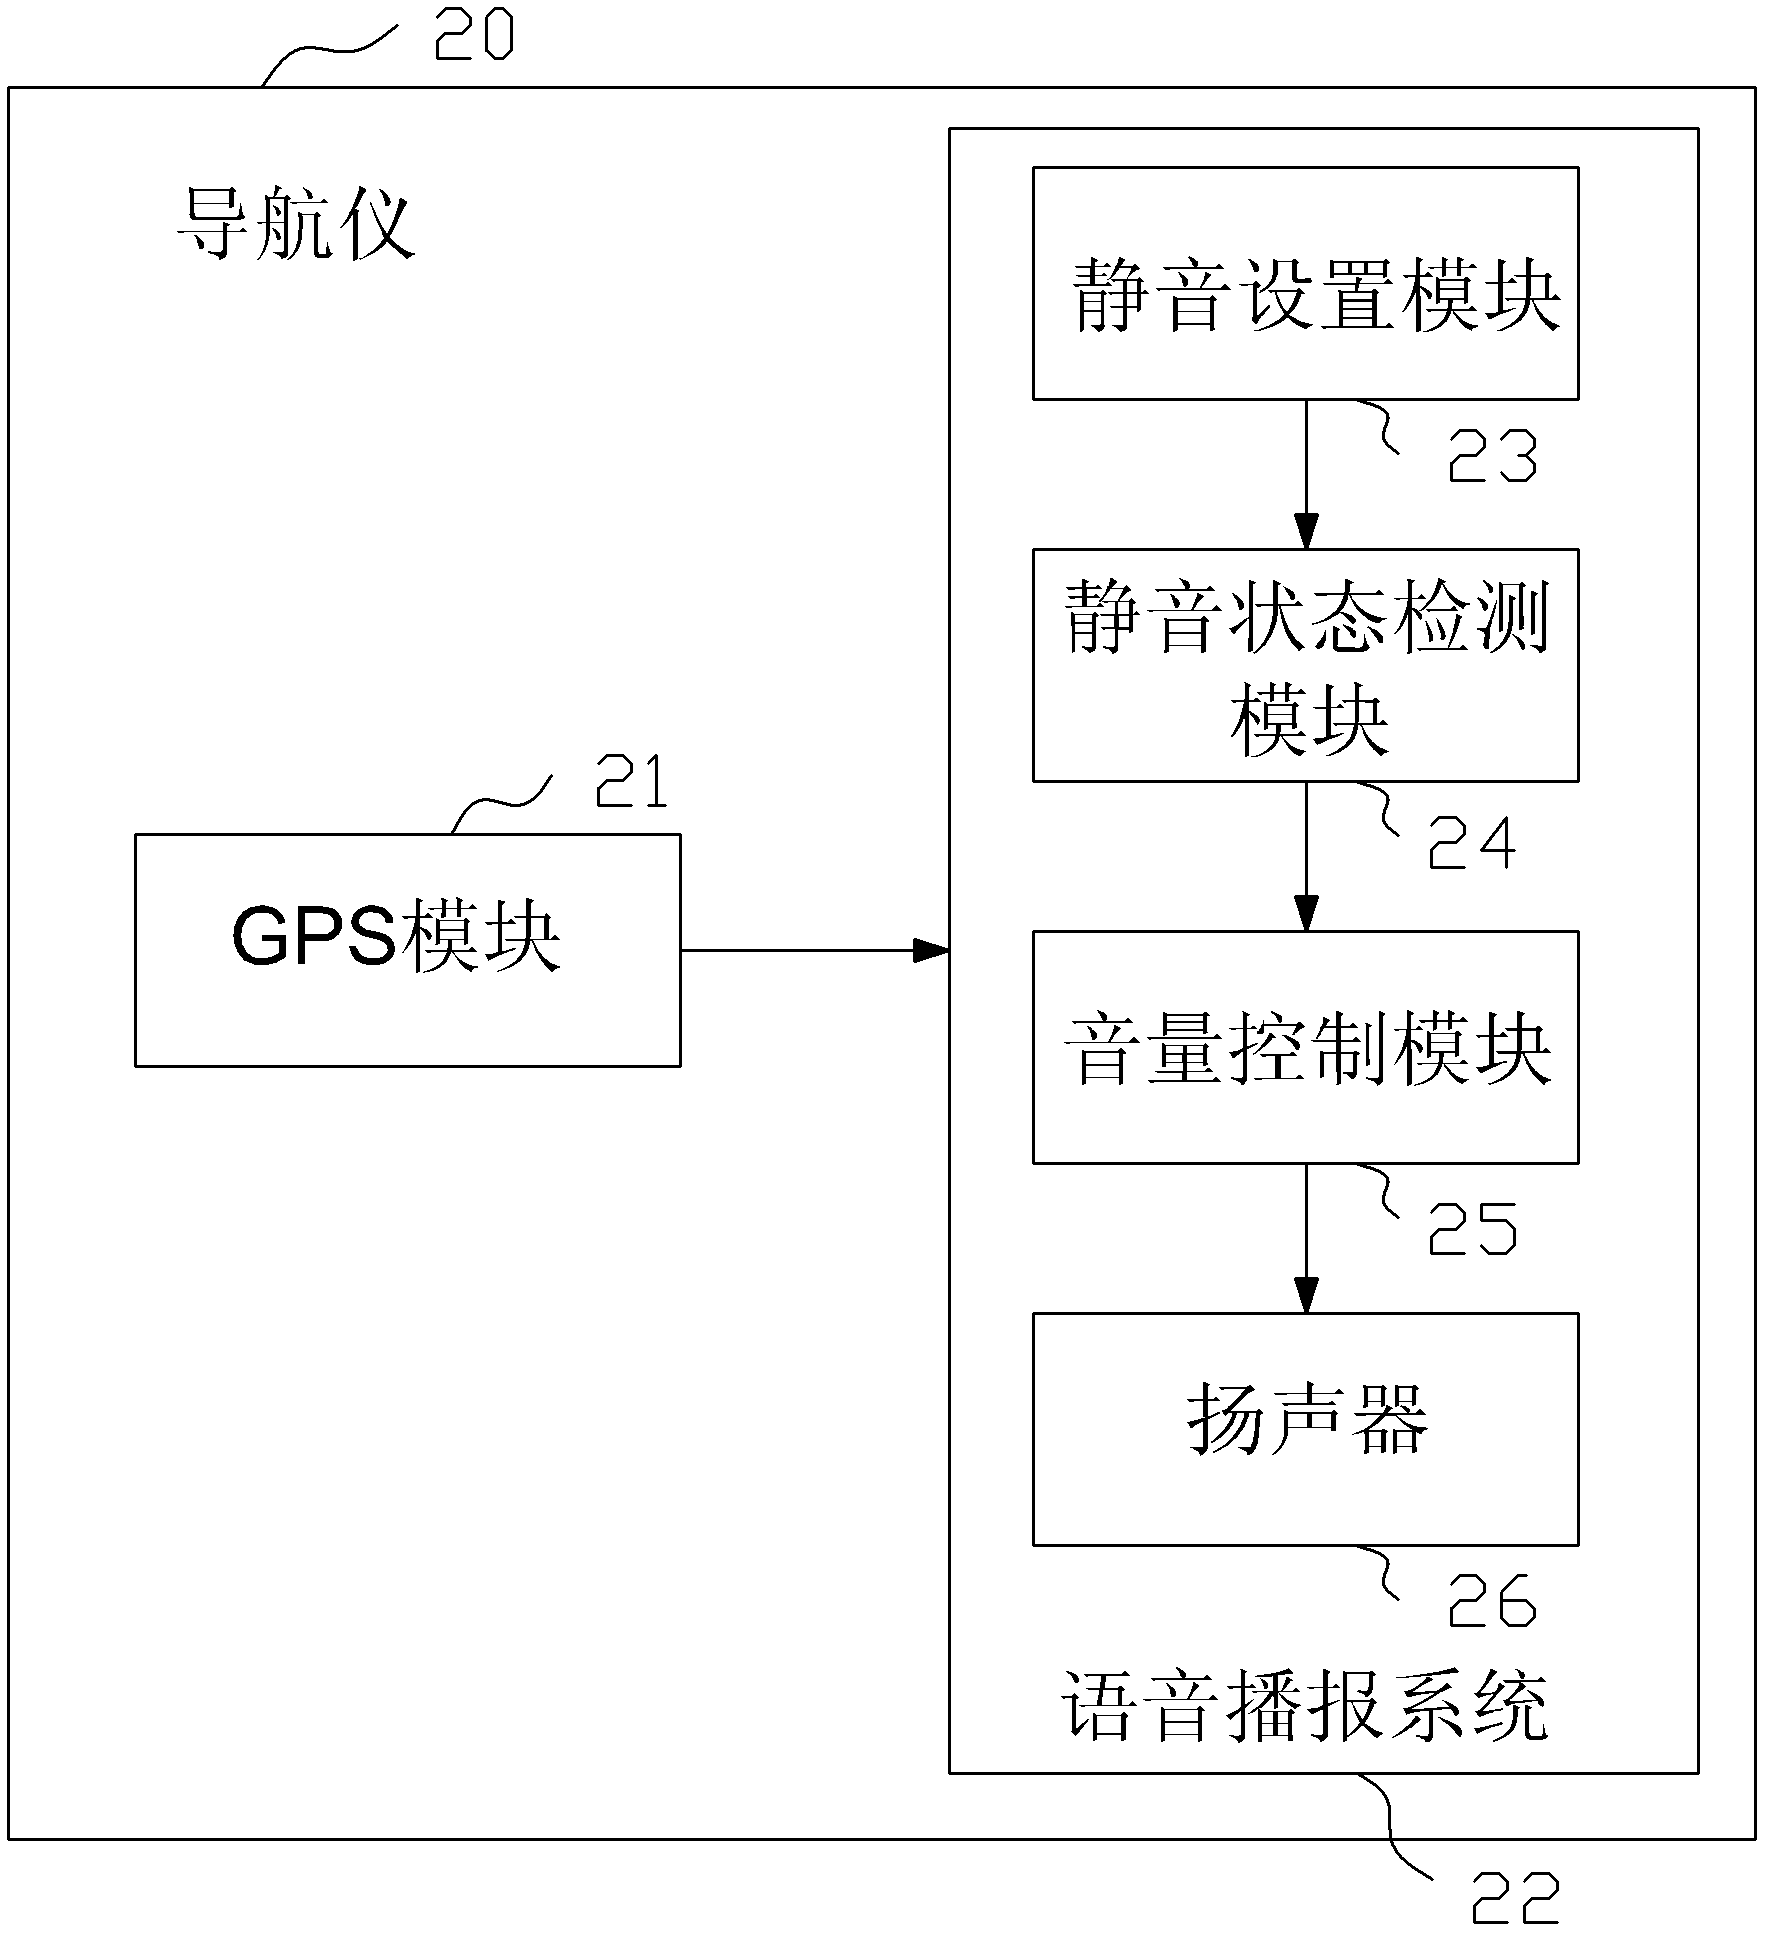 Method and device for automatic regulation of navigator voice broadcasting volume